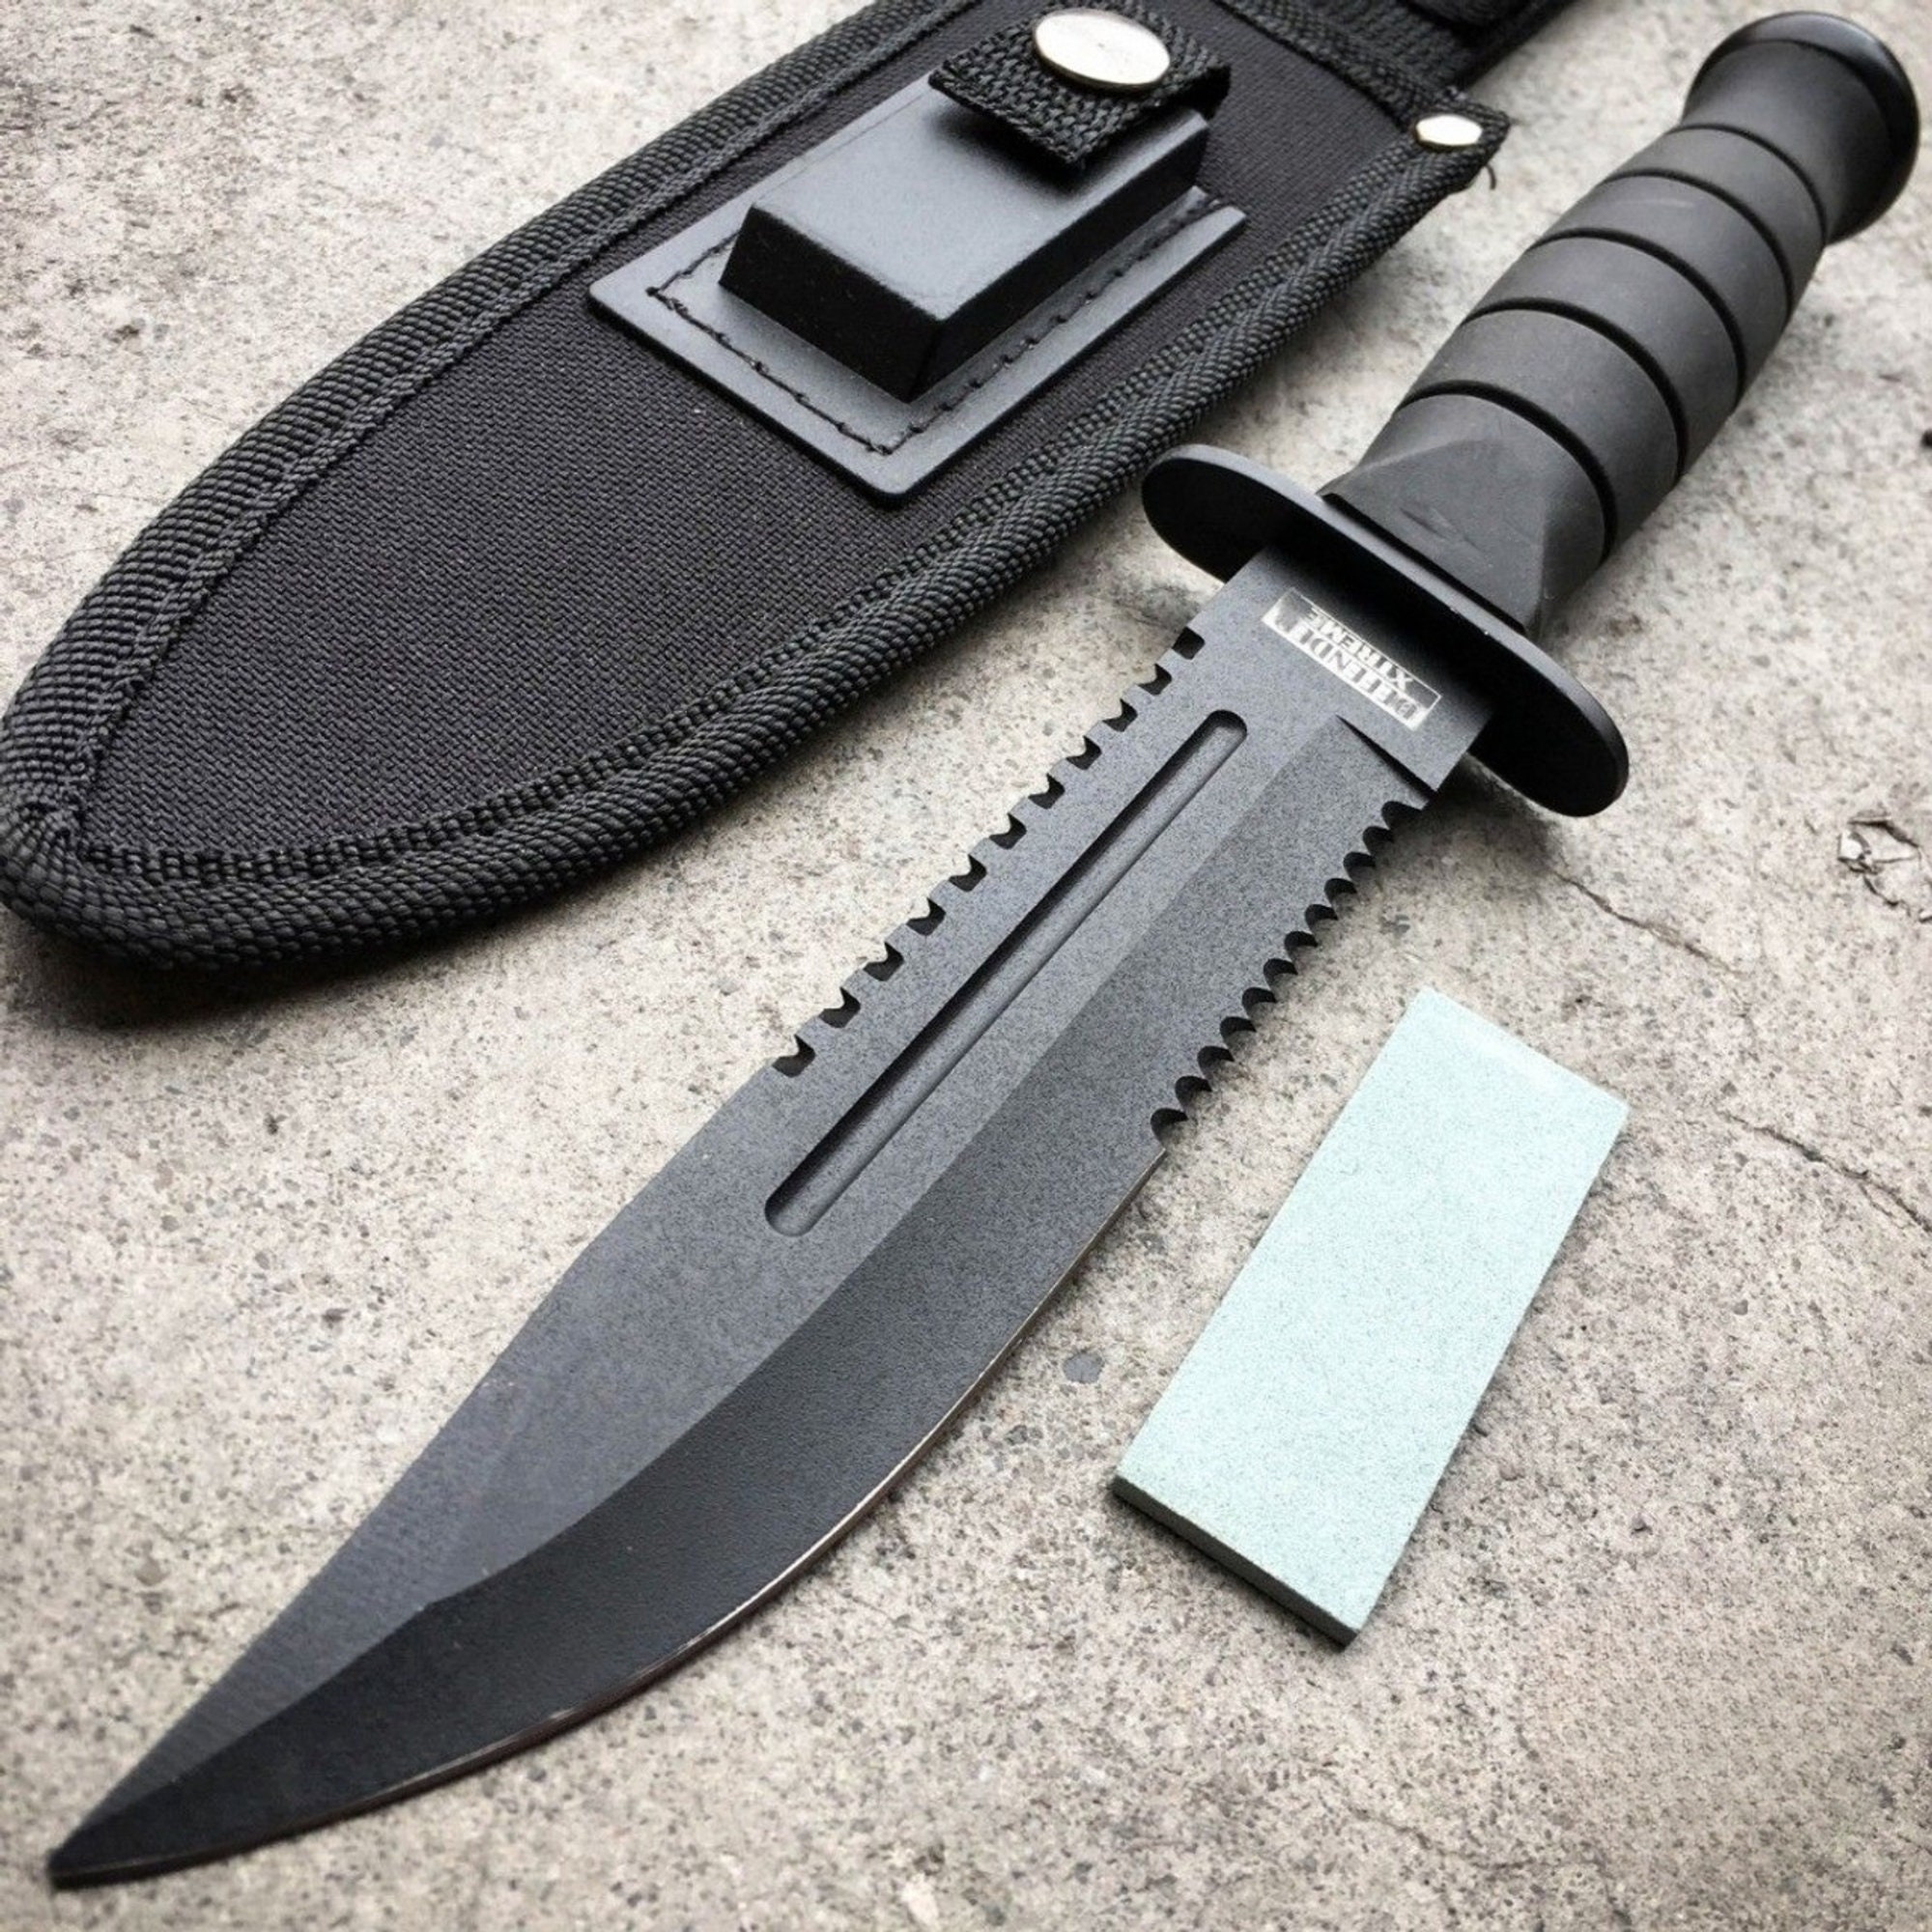 12.5 Military Black Tactical Survival FIXED BLADE HUNTING Knife w